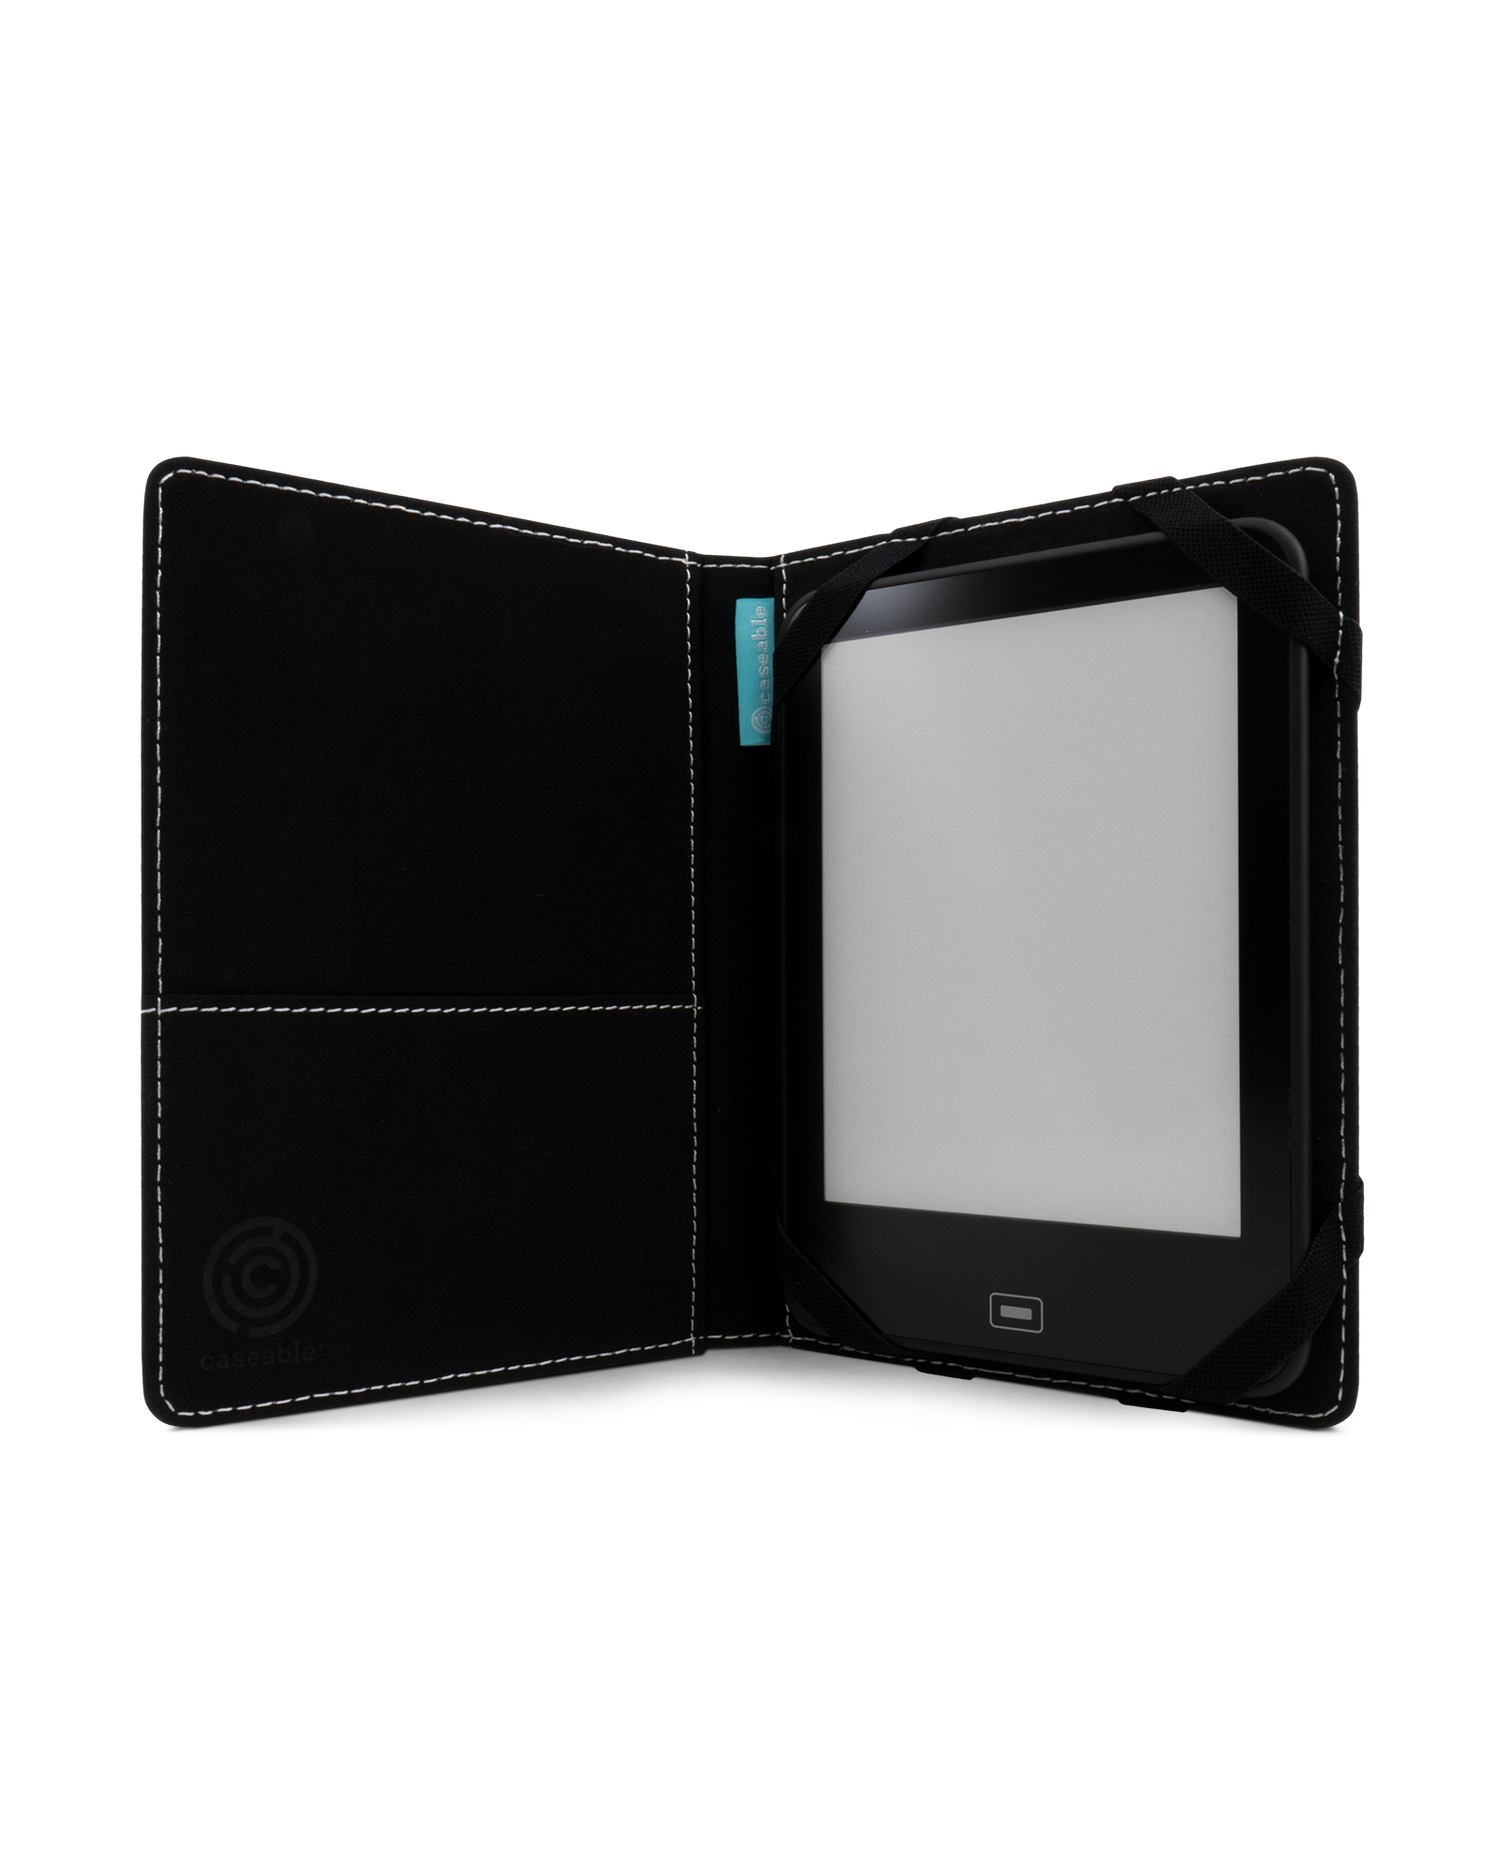 CLASSIC BLUE eReader Case S: Opened interior view